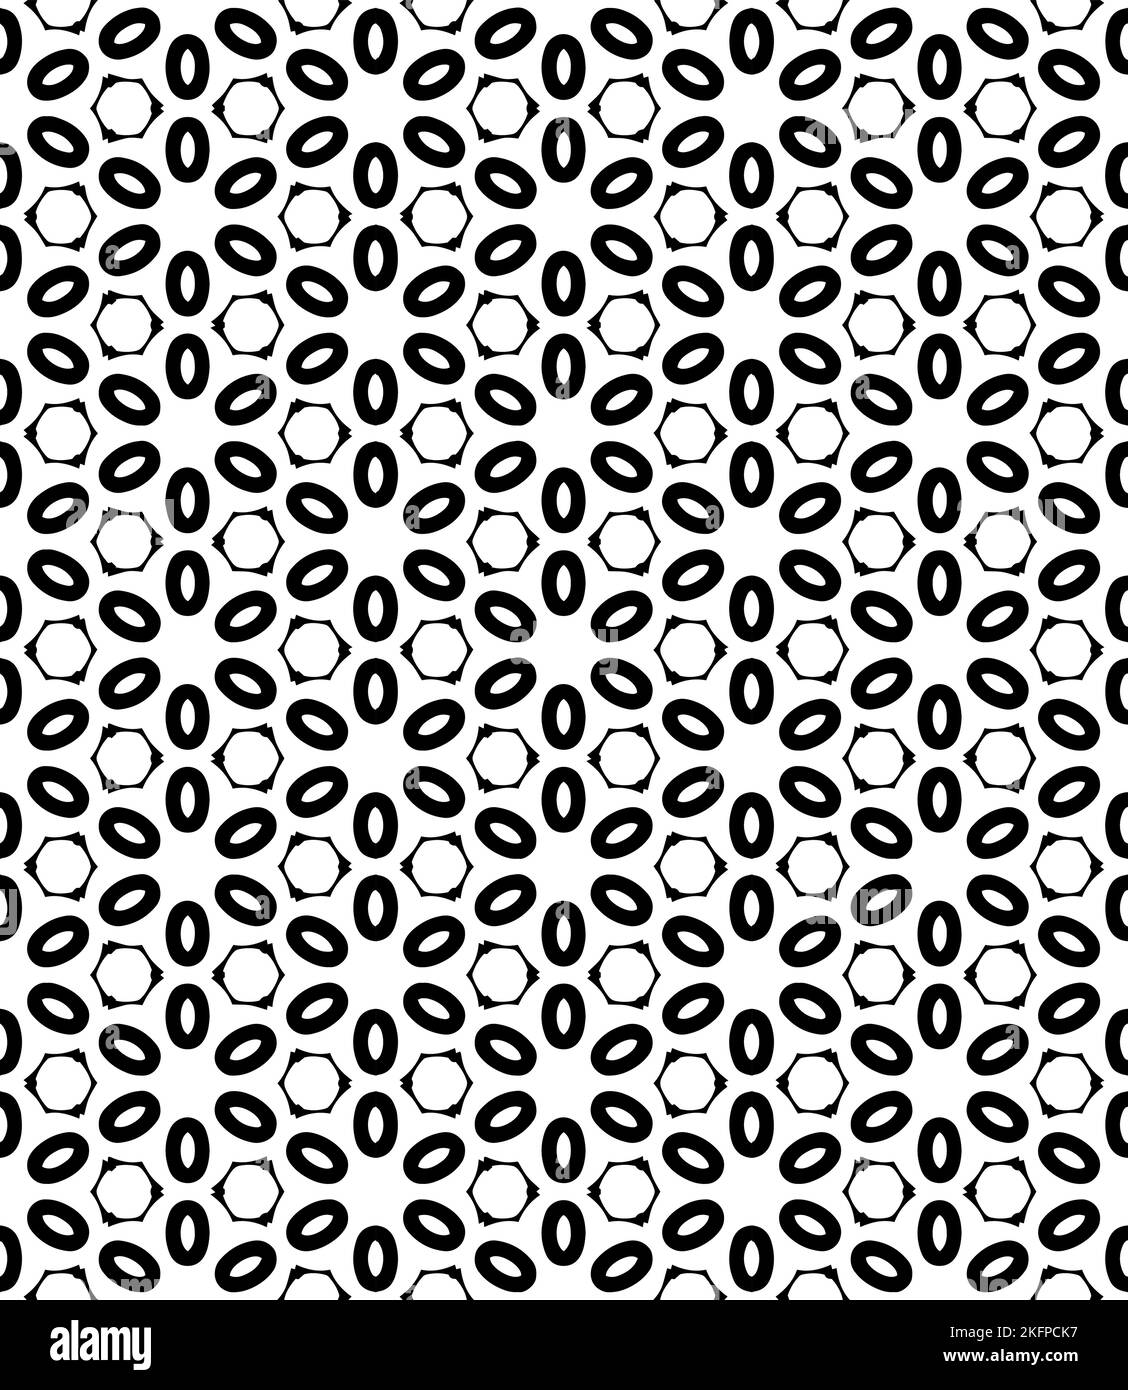 Black and white seamless abstract pattern. Background and backdrop. Grayscale ornamental design. Mosaic ornaments. Vector graphic illustration. EPS10. Stock Vector